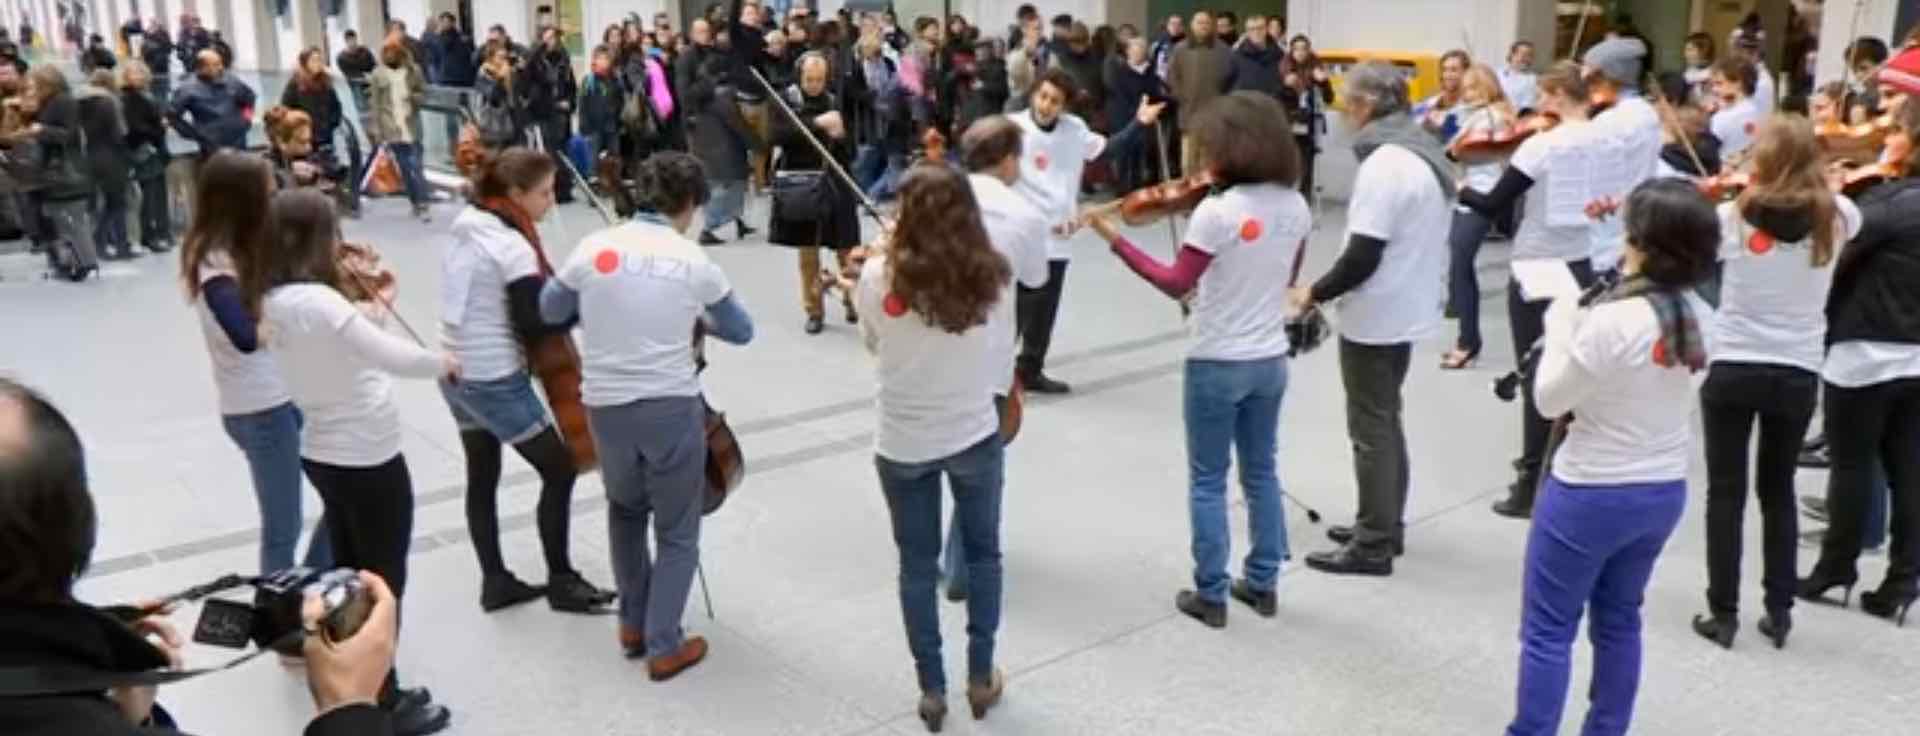 orchestra members with instruments perform at the Gare Saint-Lazare wearing jeans and white tee shirts with crowd watching